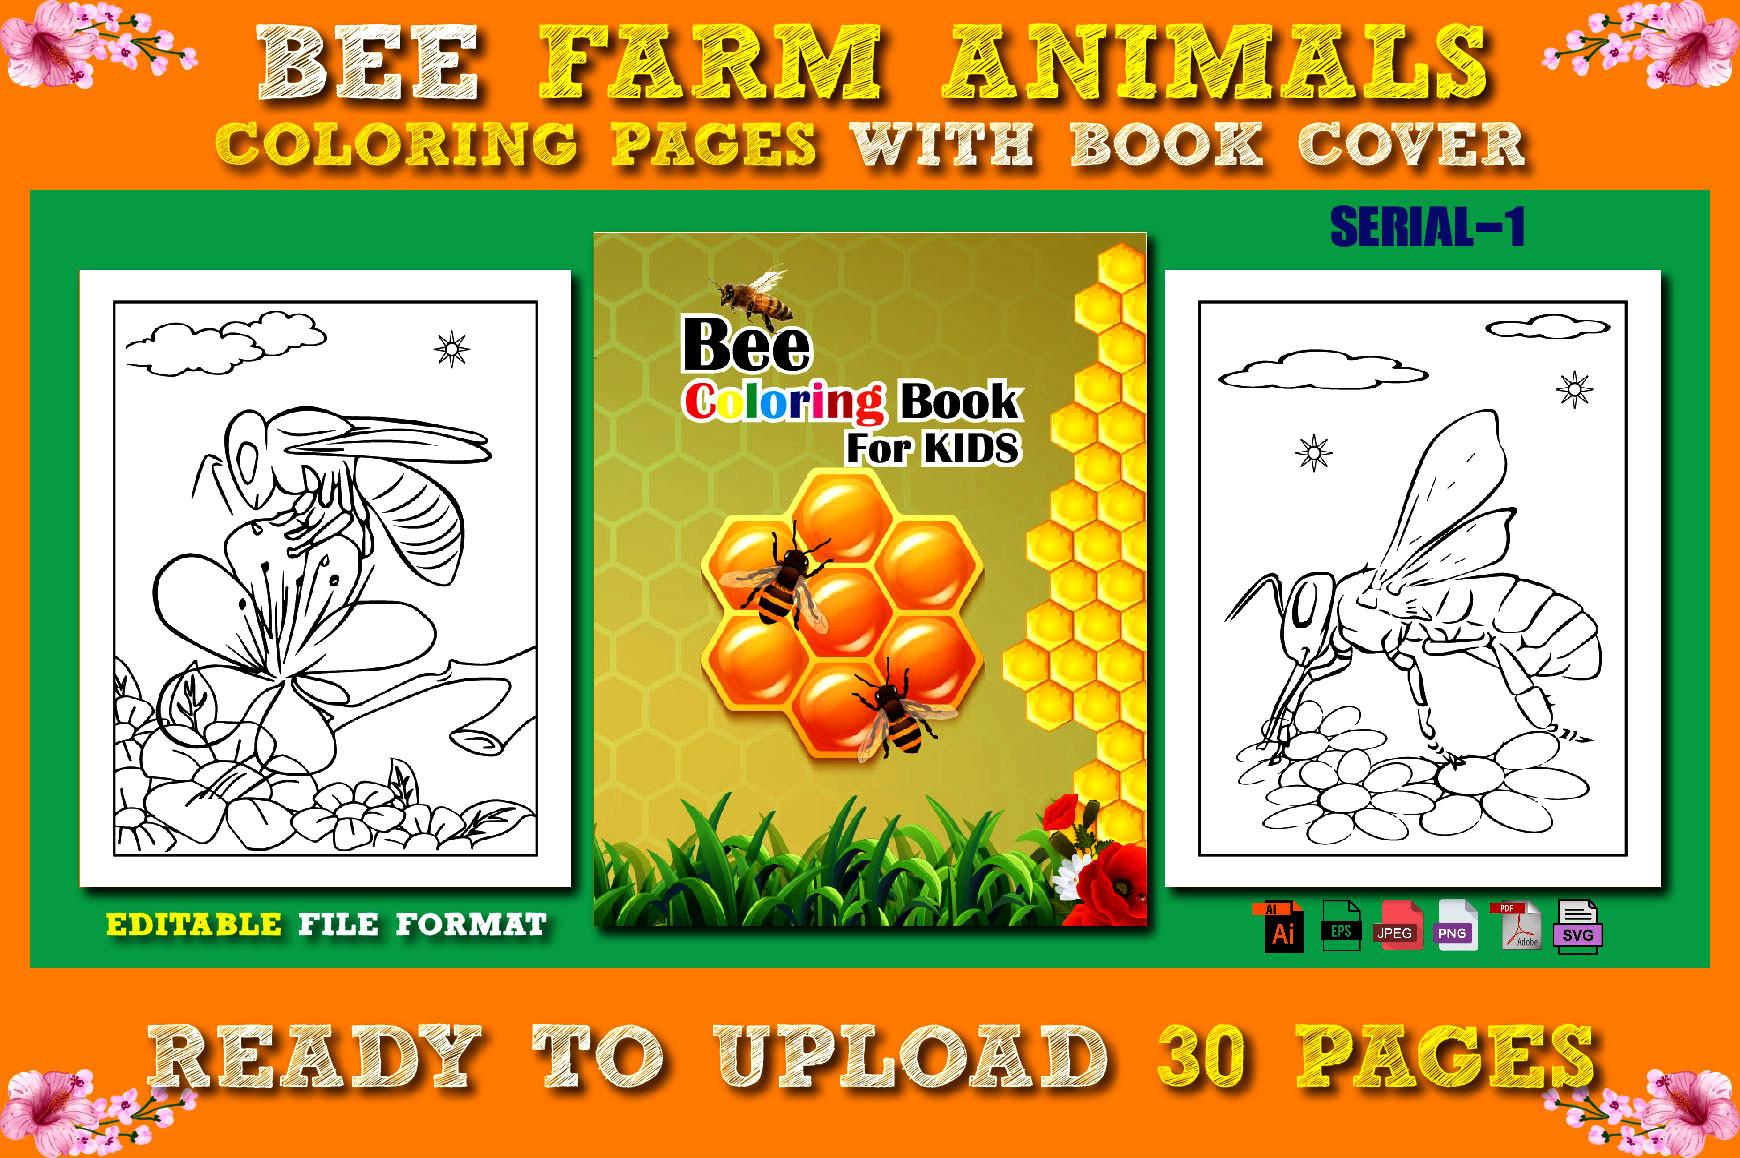 Bee Farm Animals Coloring Pages